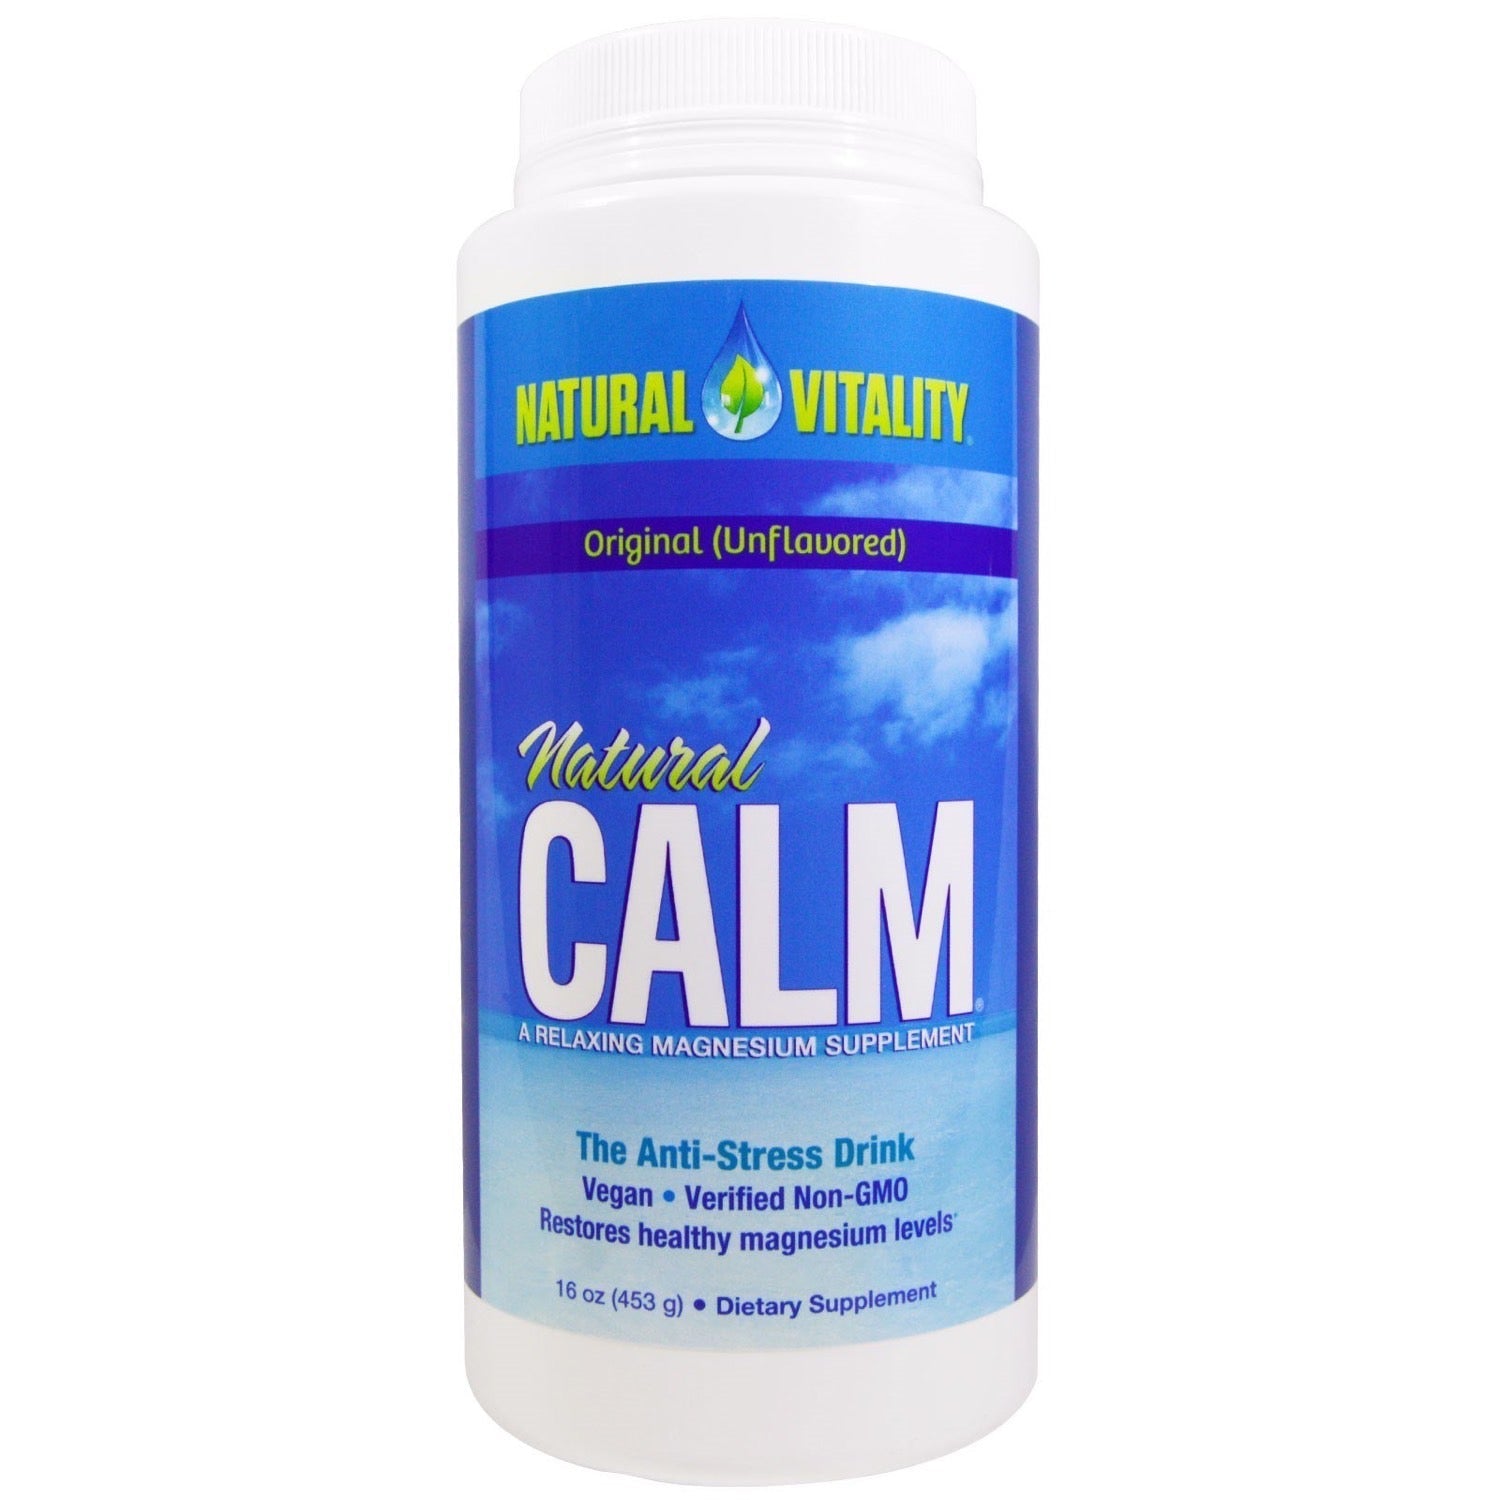 Natural Vitality Calm Anti-Stress Magnesium Drink Dietary Supplement Powder